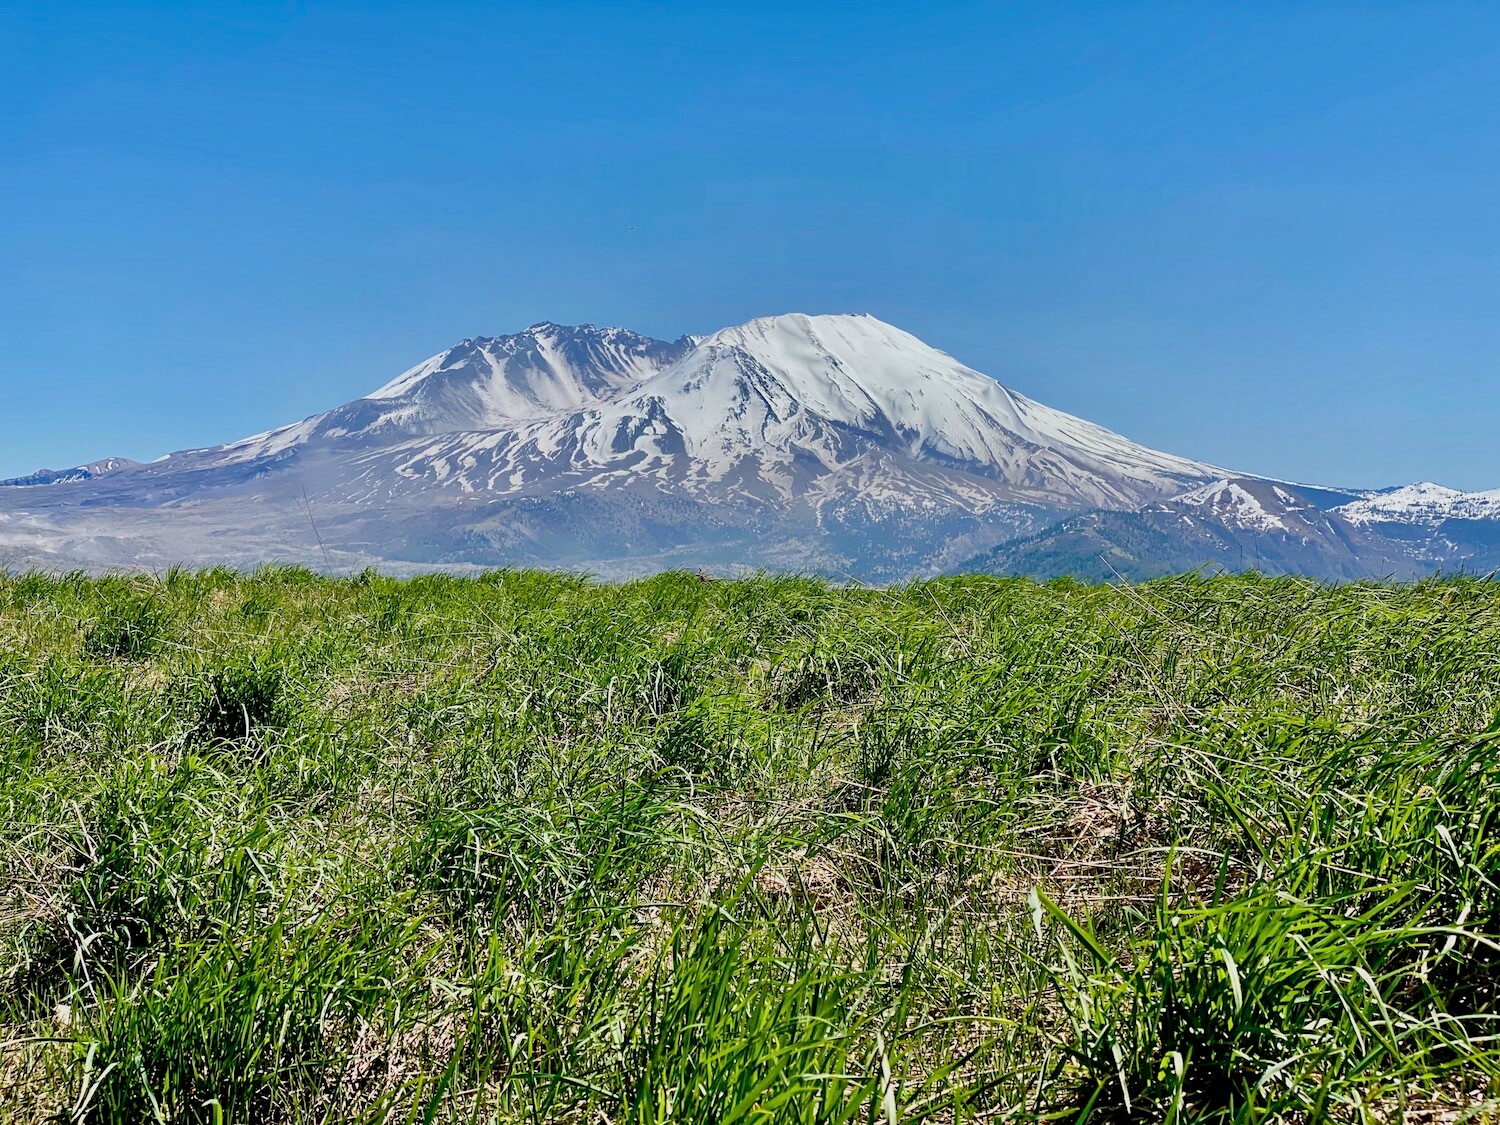 View of Mt. St. Helens on a blue sky sunny day from the Spirit Lake Memorial Highway. The grass is growing up bright green on a hillside the looks toward the snow-covered mountain with gray veins of rocky surfaces leading to largest areas of gray ashy ground. The sky is bright blue.